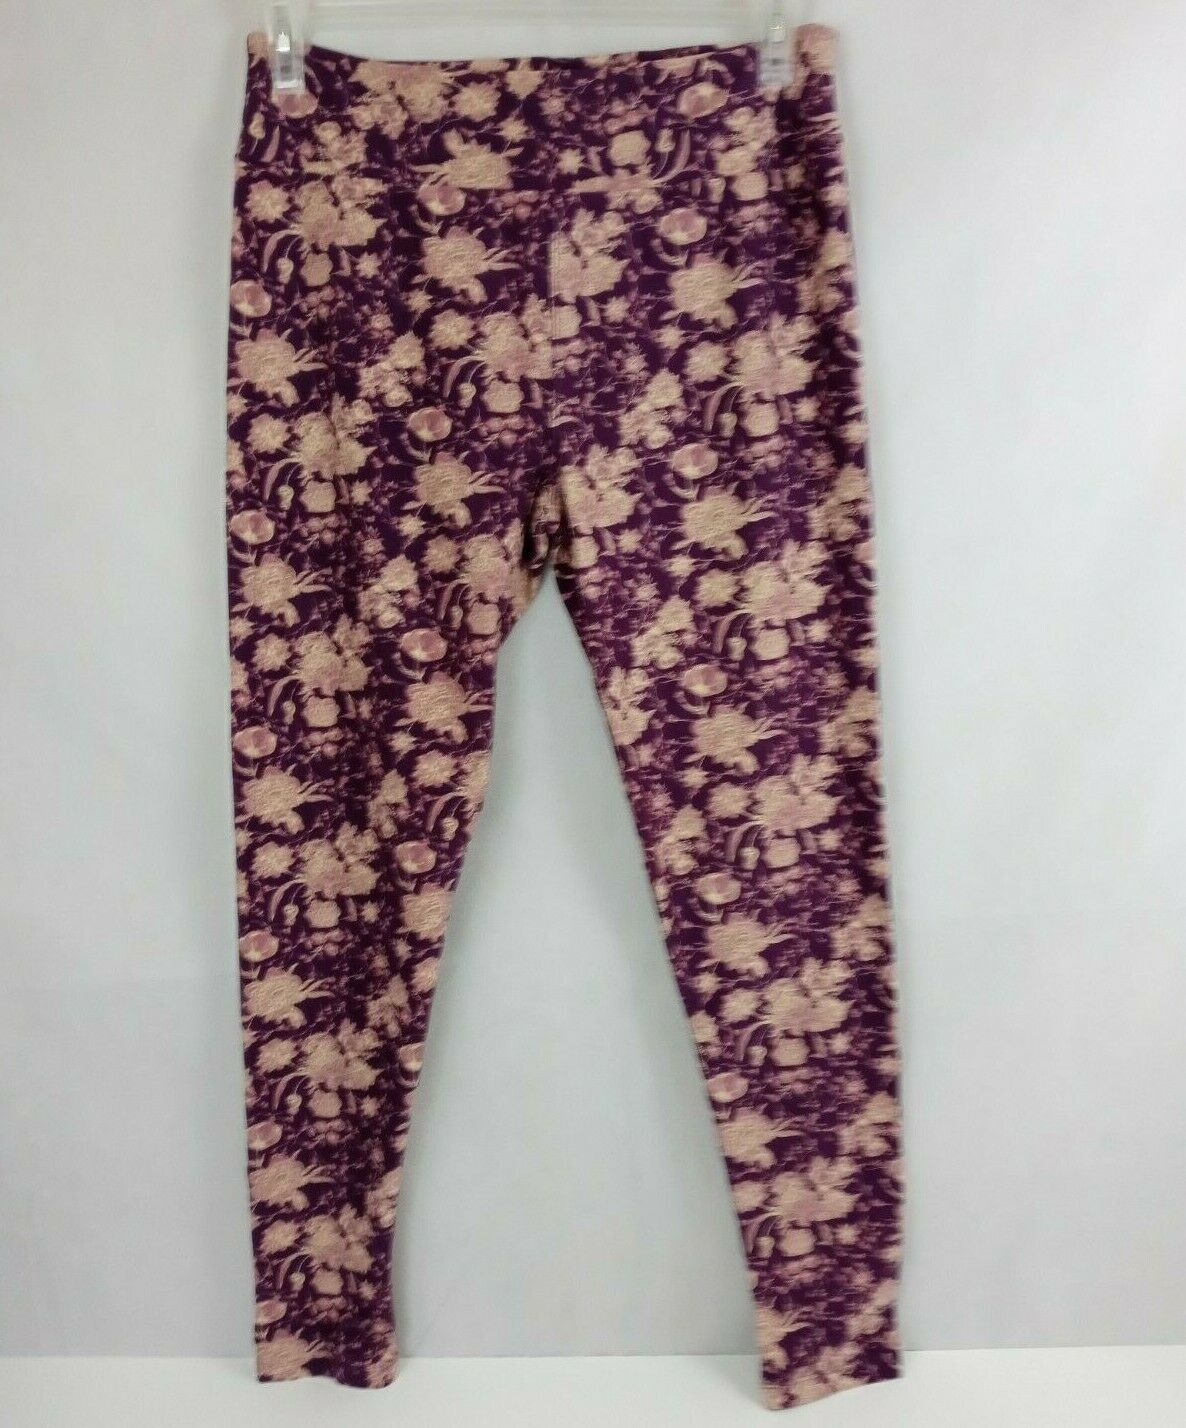 Lularoe Women's Tall And Curvy Leggings Pink With Blue Pants Soft